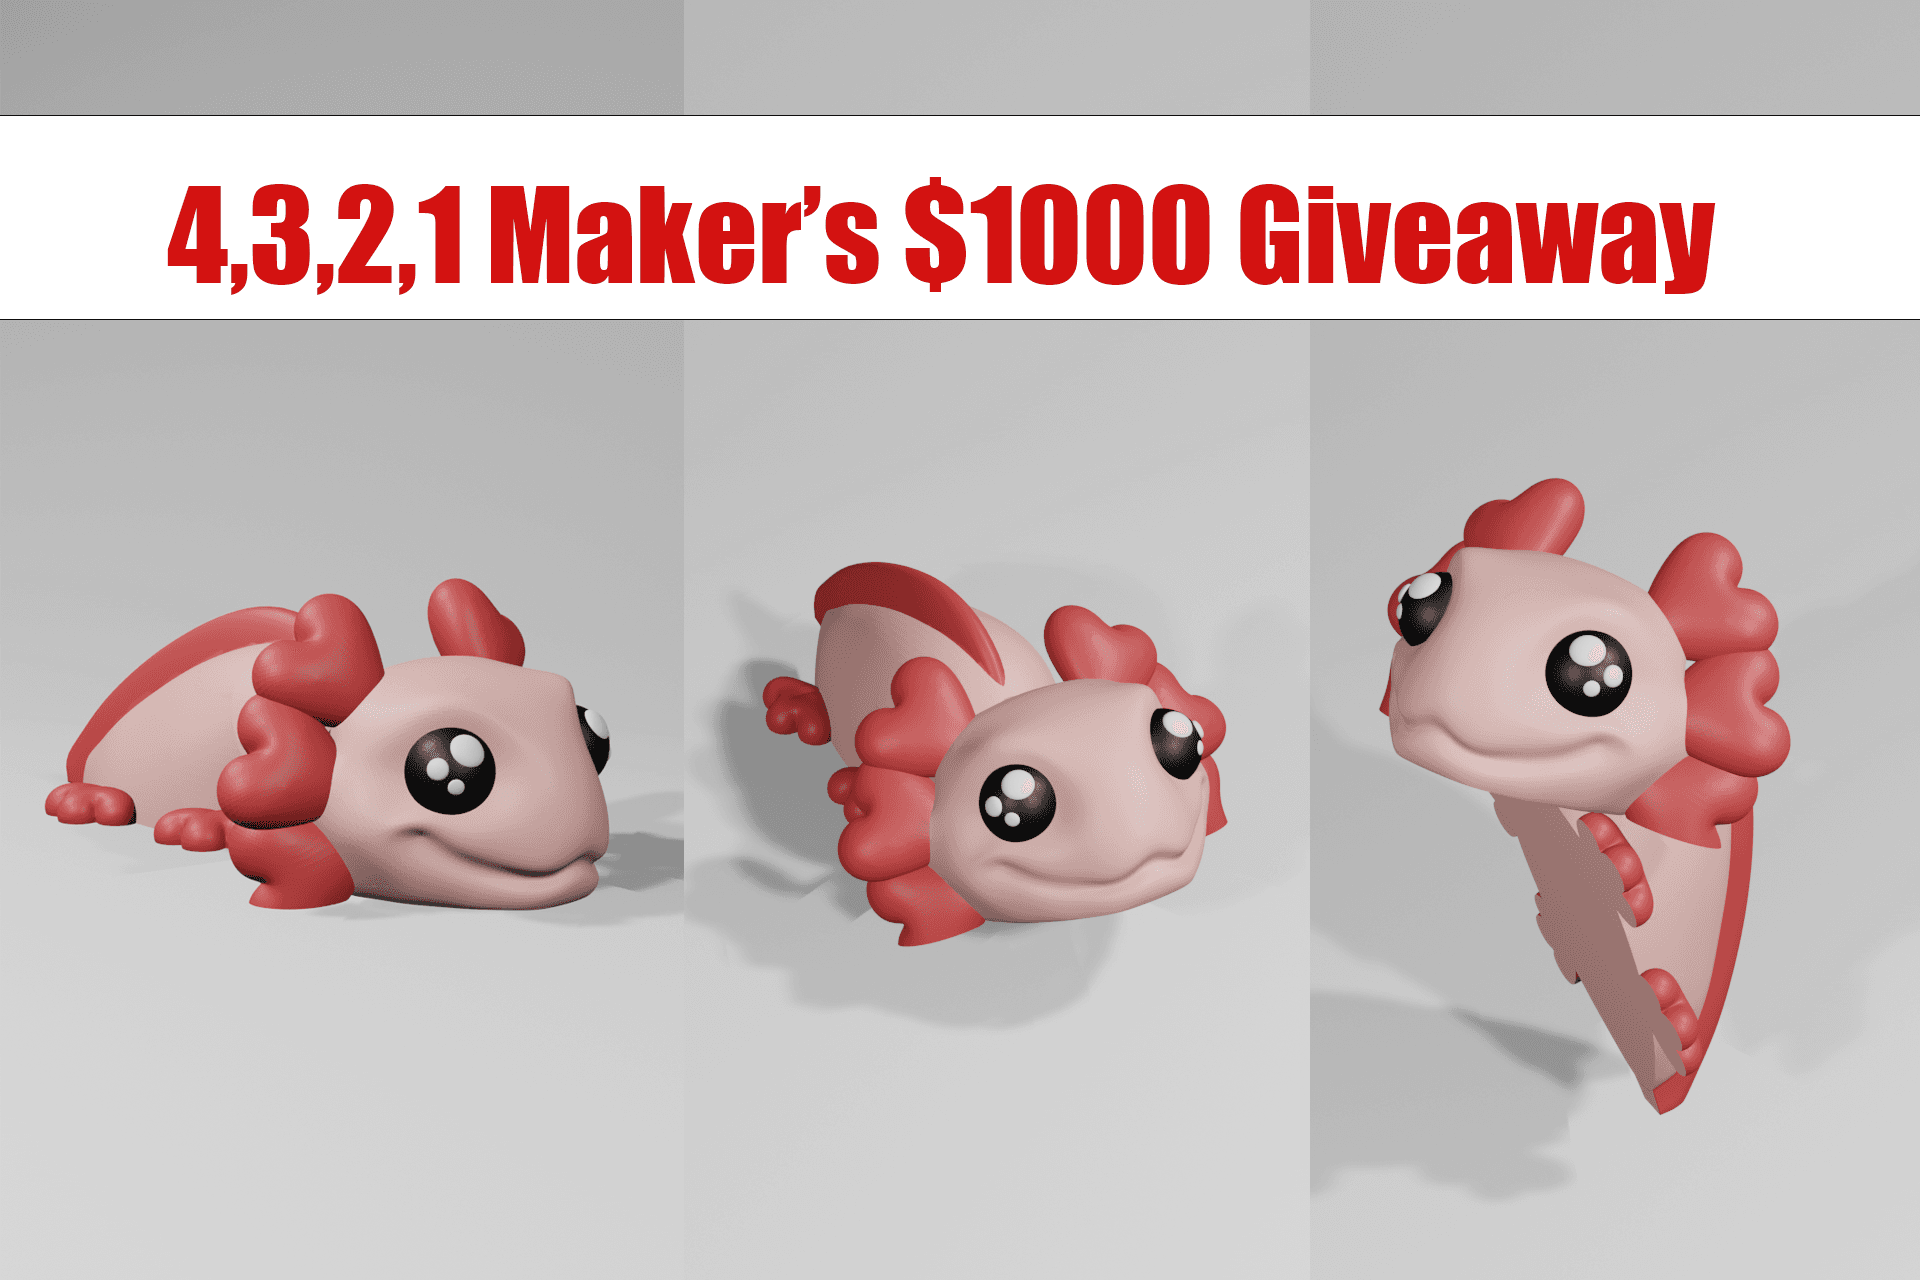 🚨Another WILD Maker Giveaway!   Another $1000?🚨
